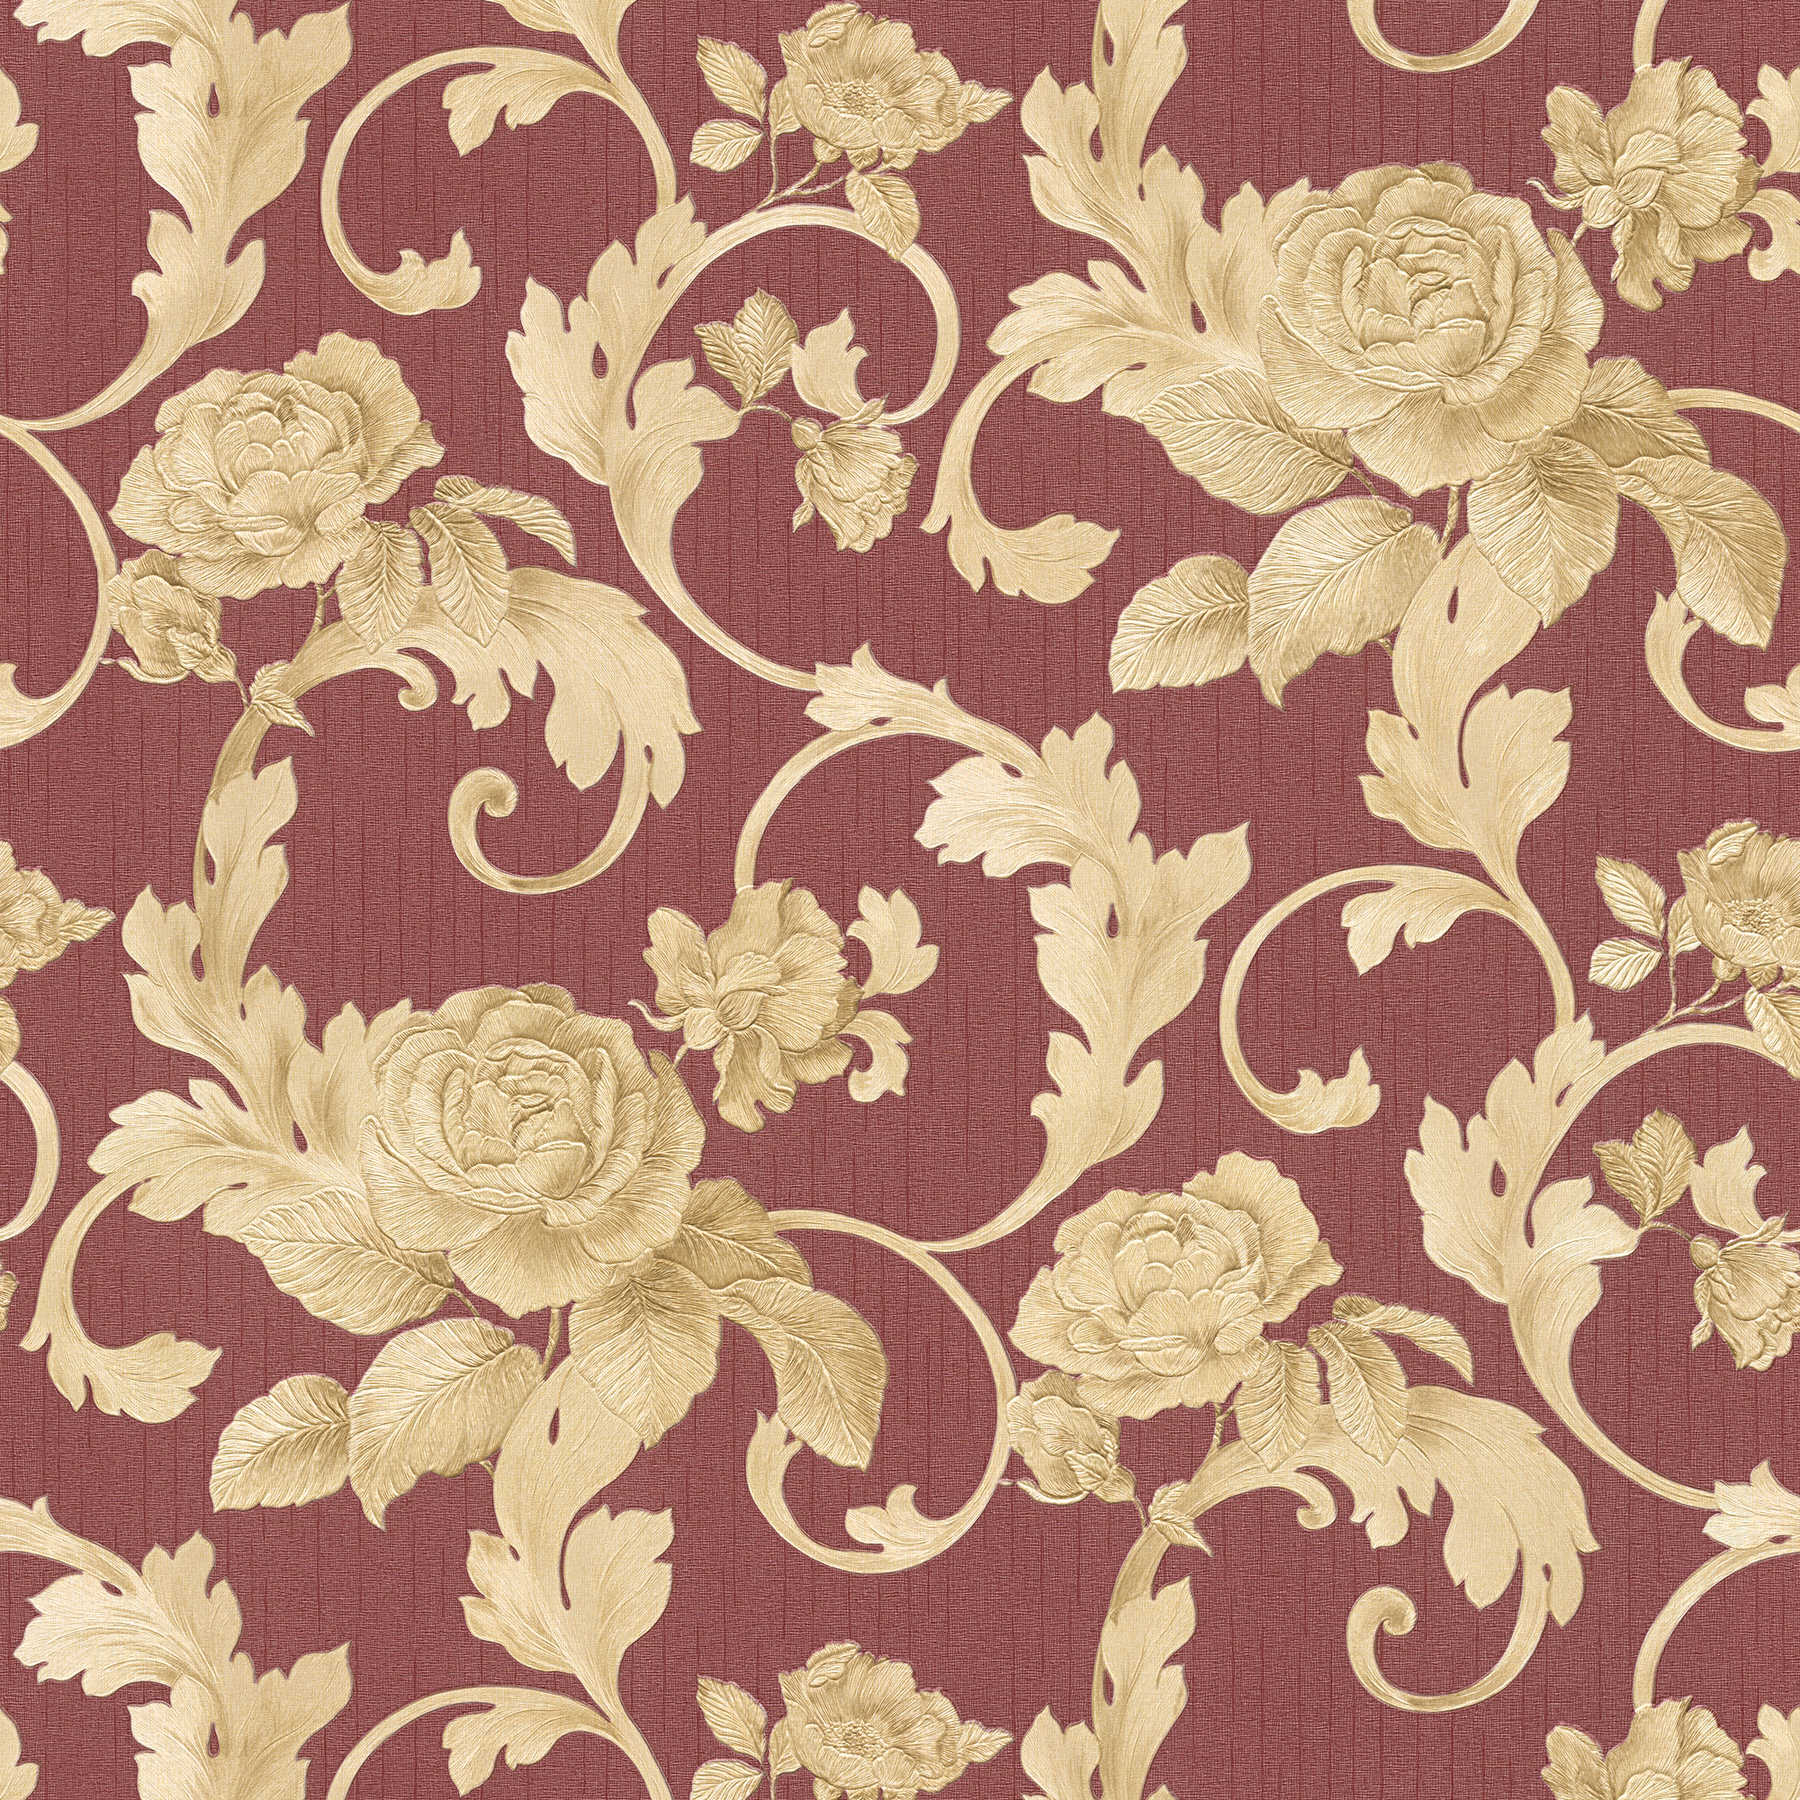         Wallpaper with golden roses vines & textured pattern - metallic, red
    